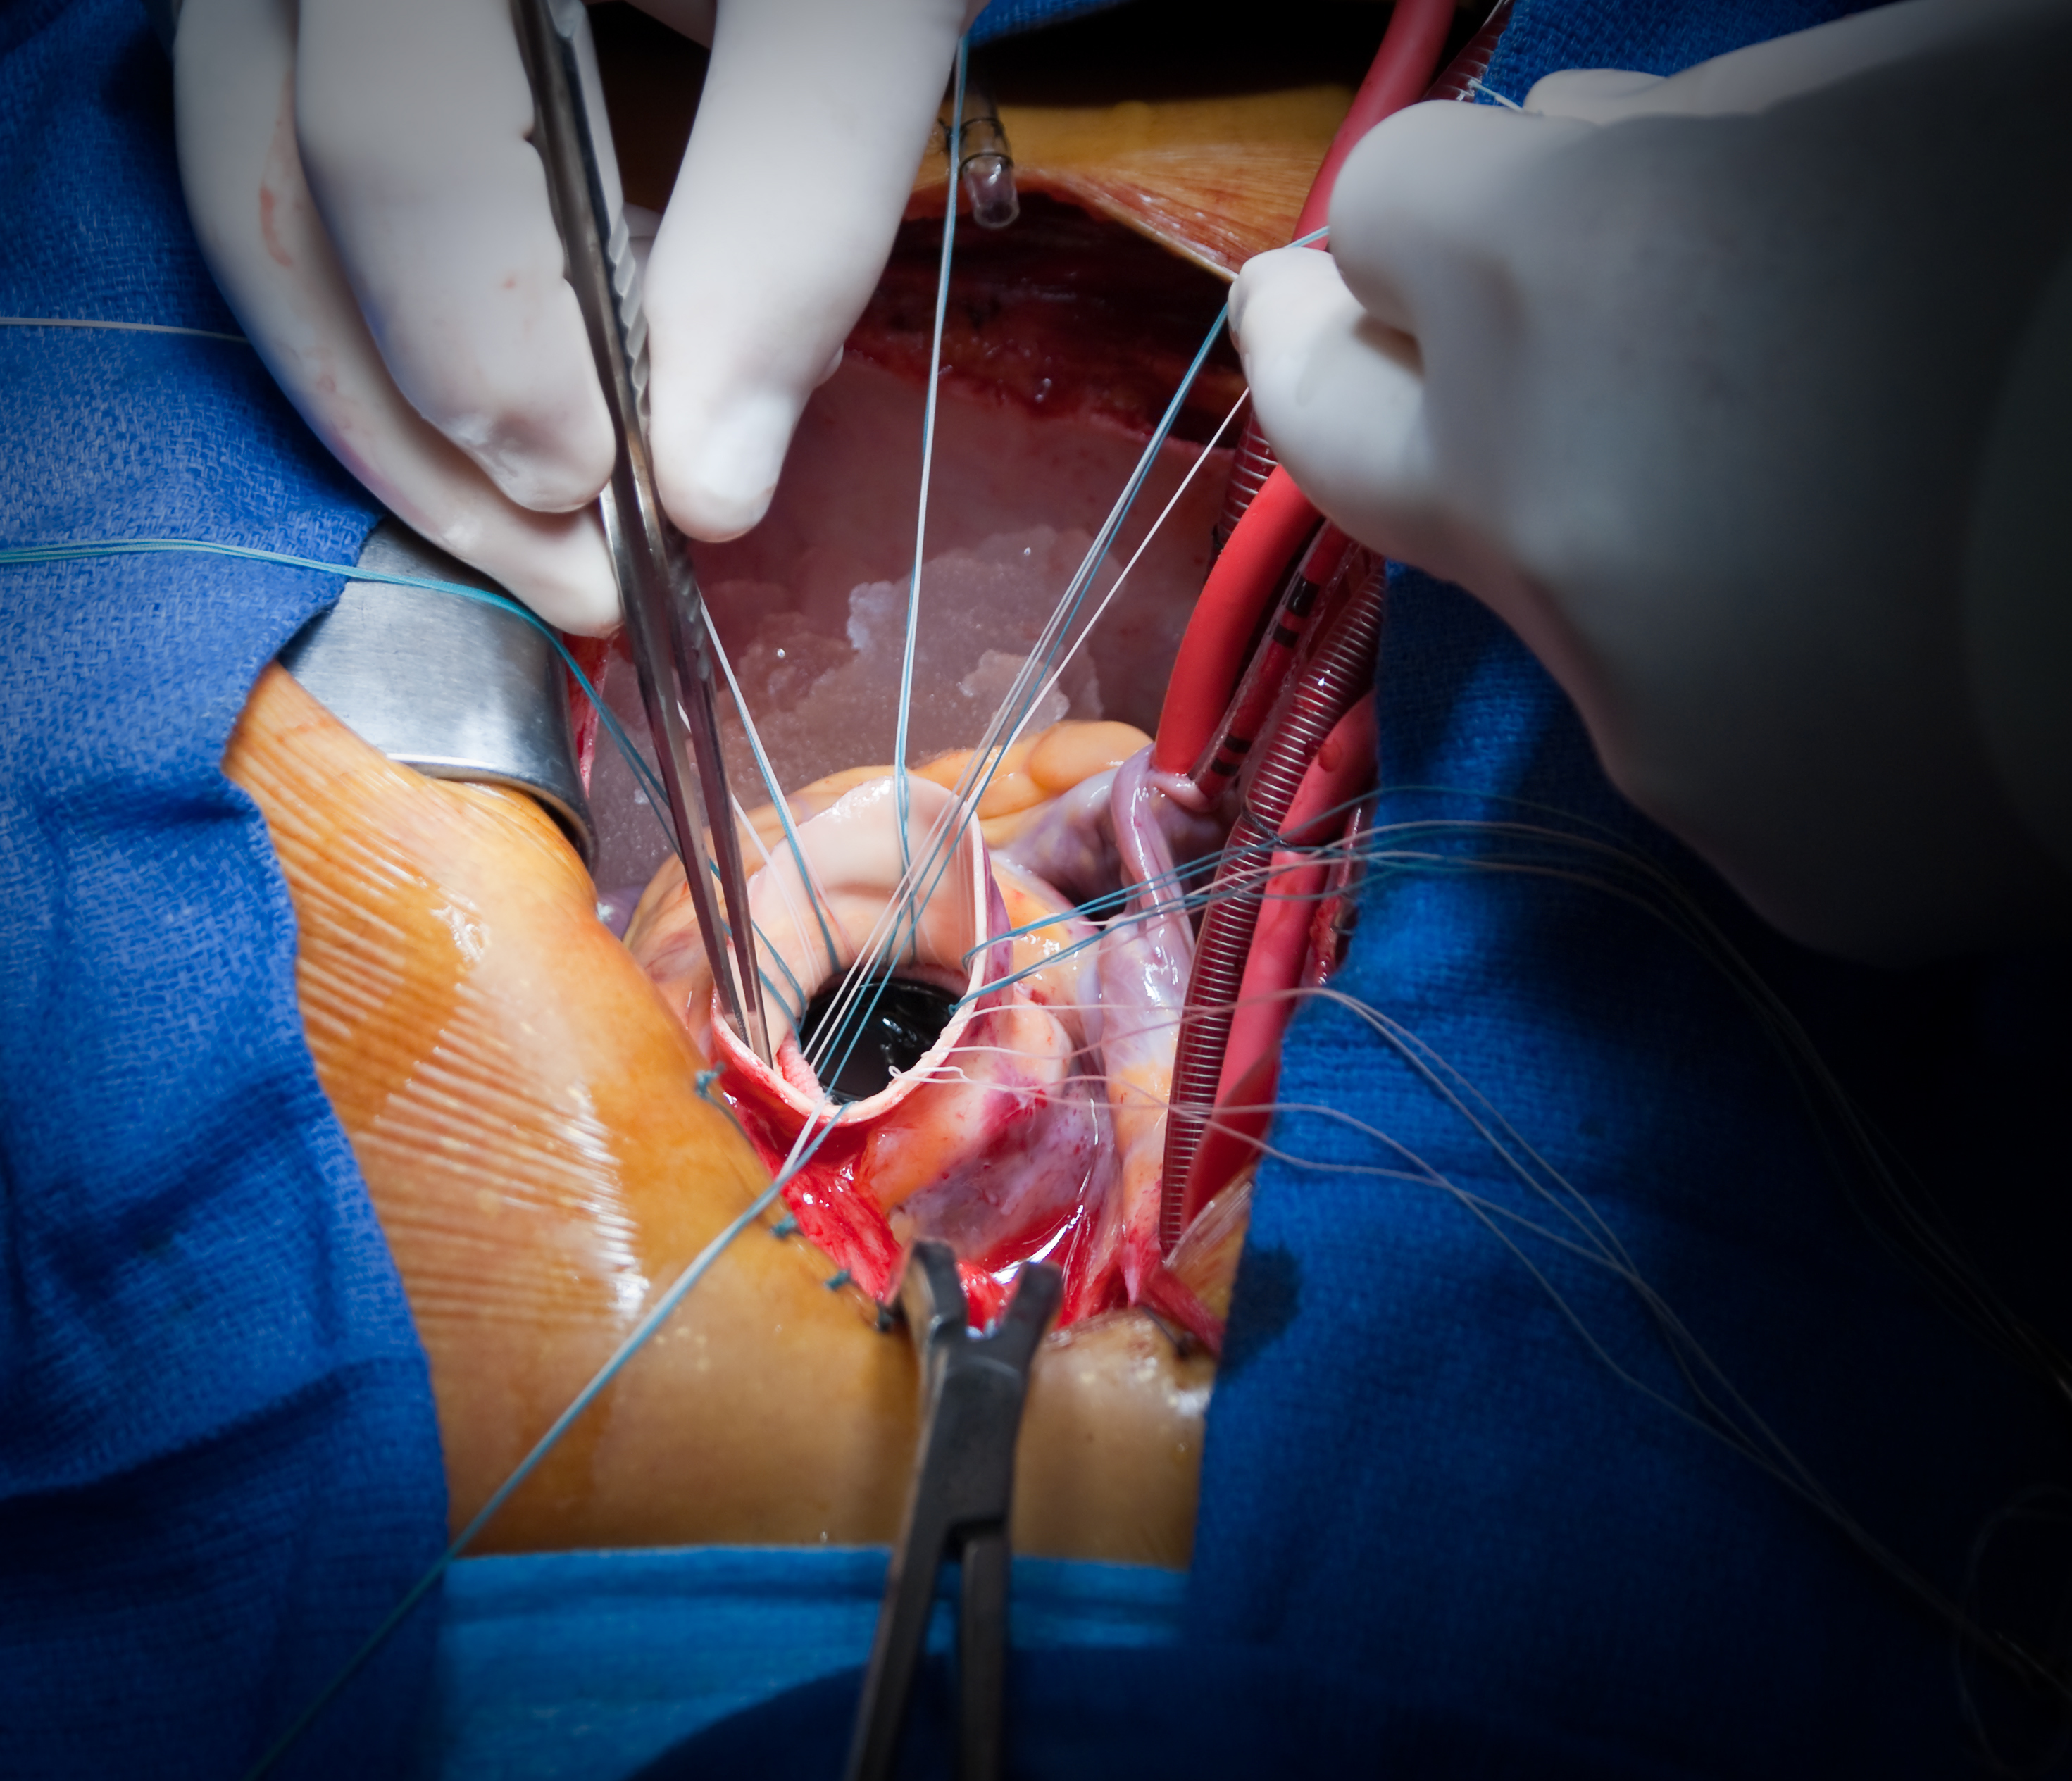 Heart Valve Replacement Surgery in Iran